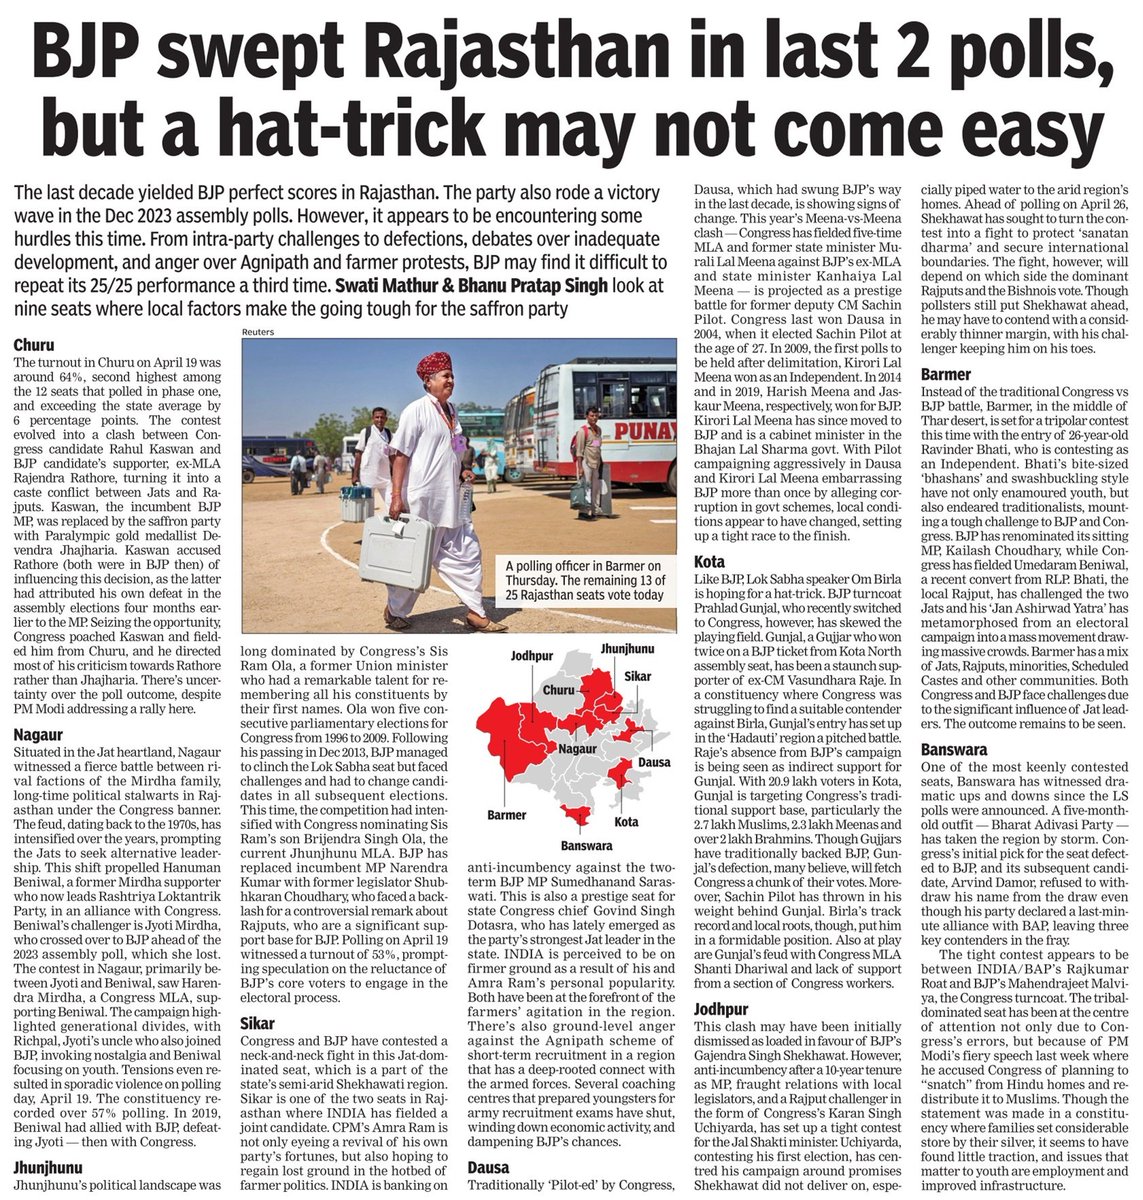 Hat-trick in Rajasthan may not come easy for BJP